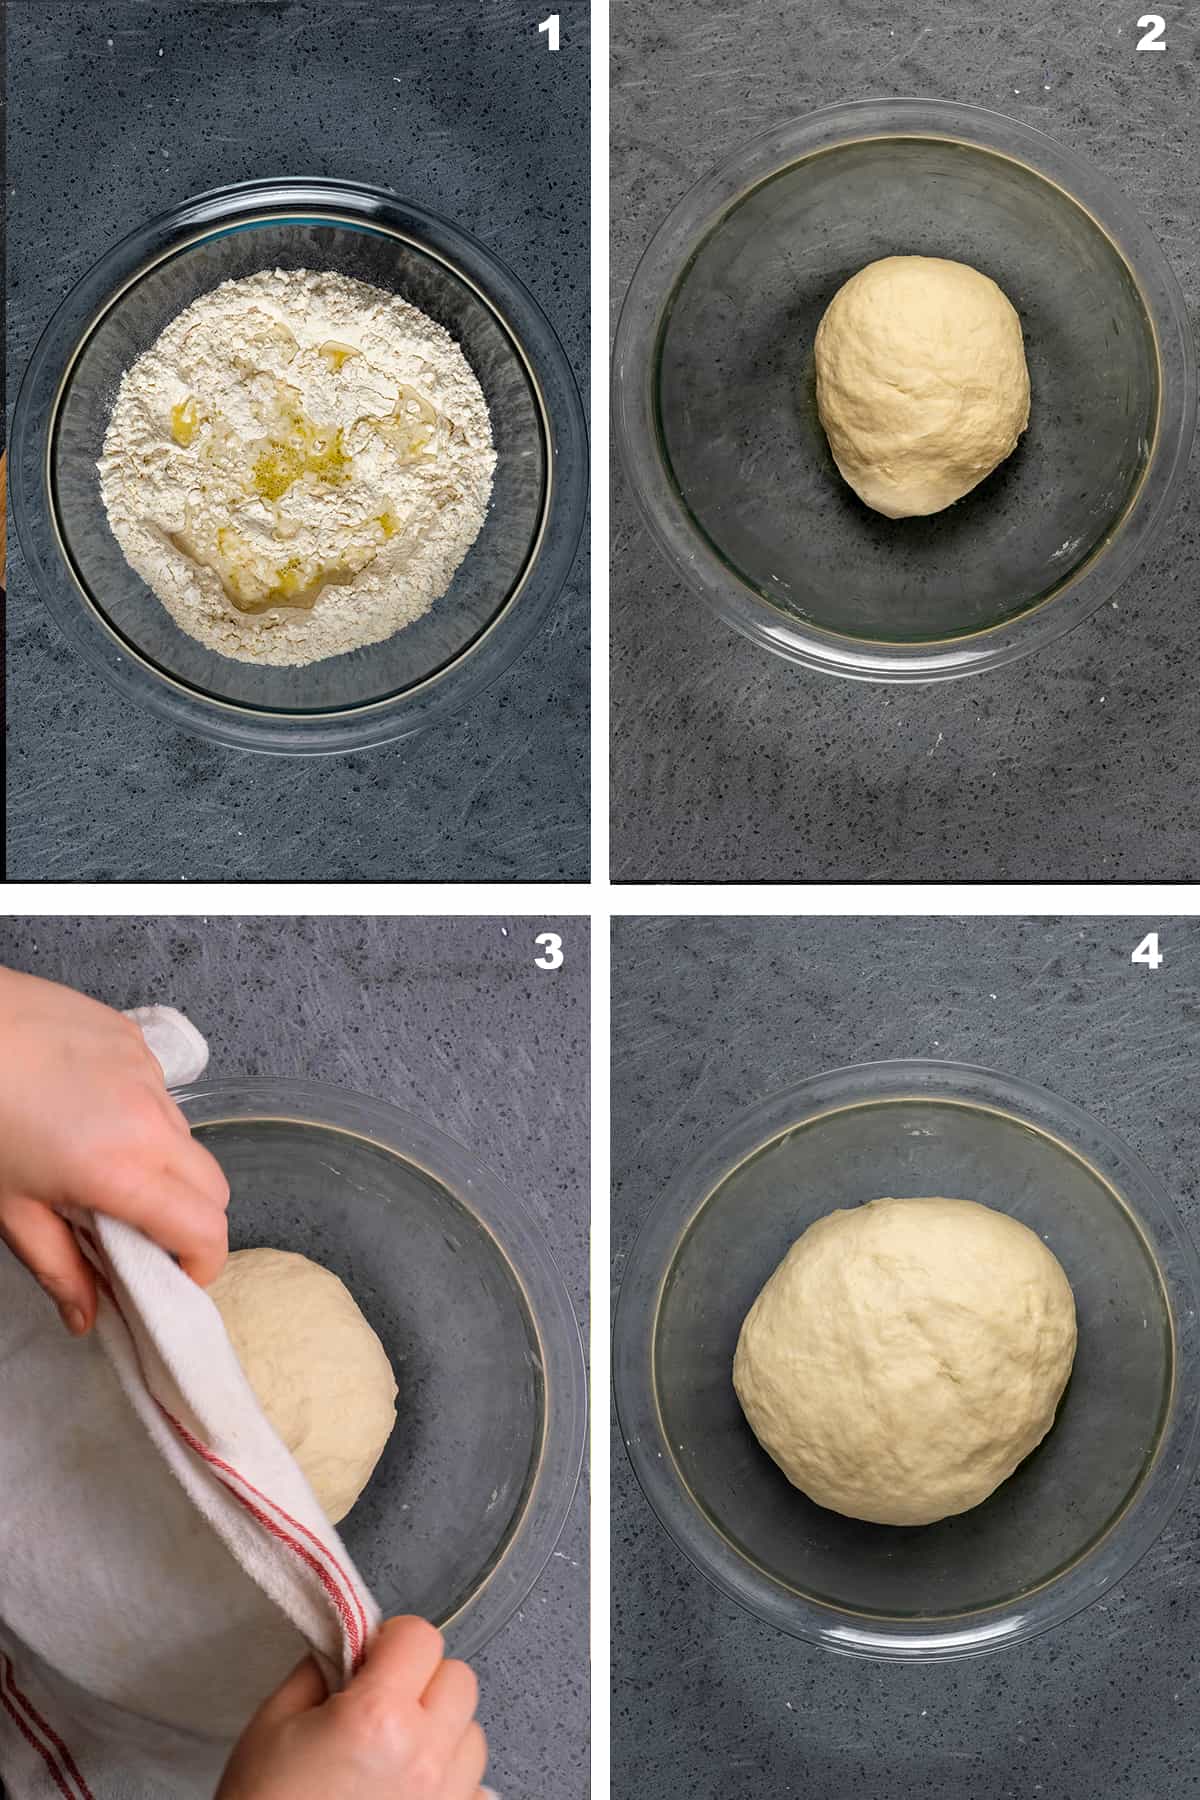 The steps of preparing dough is shown in four pictures.